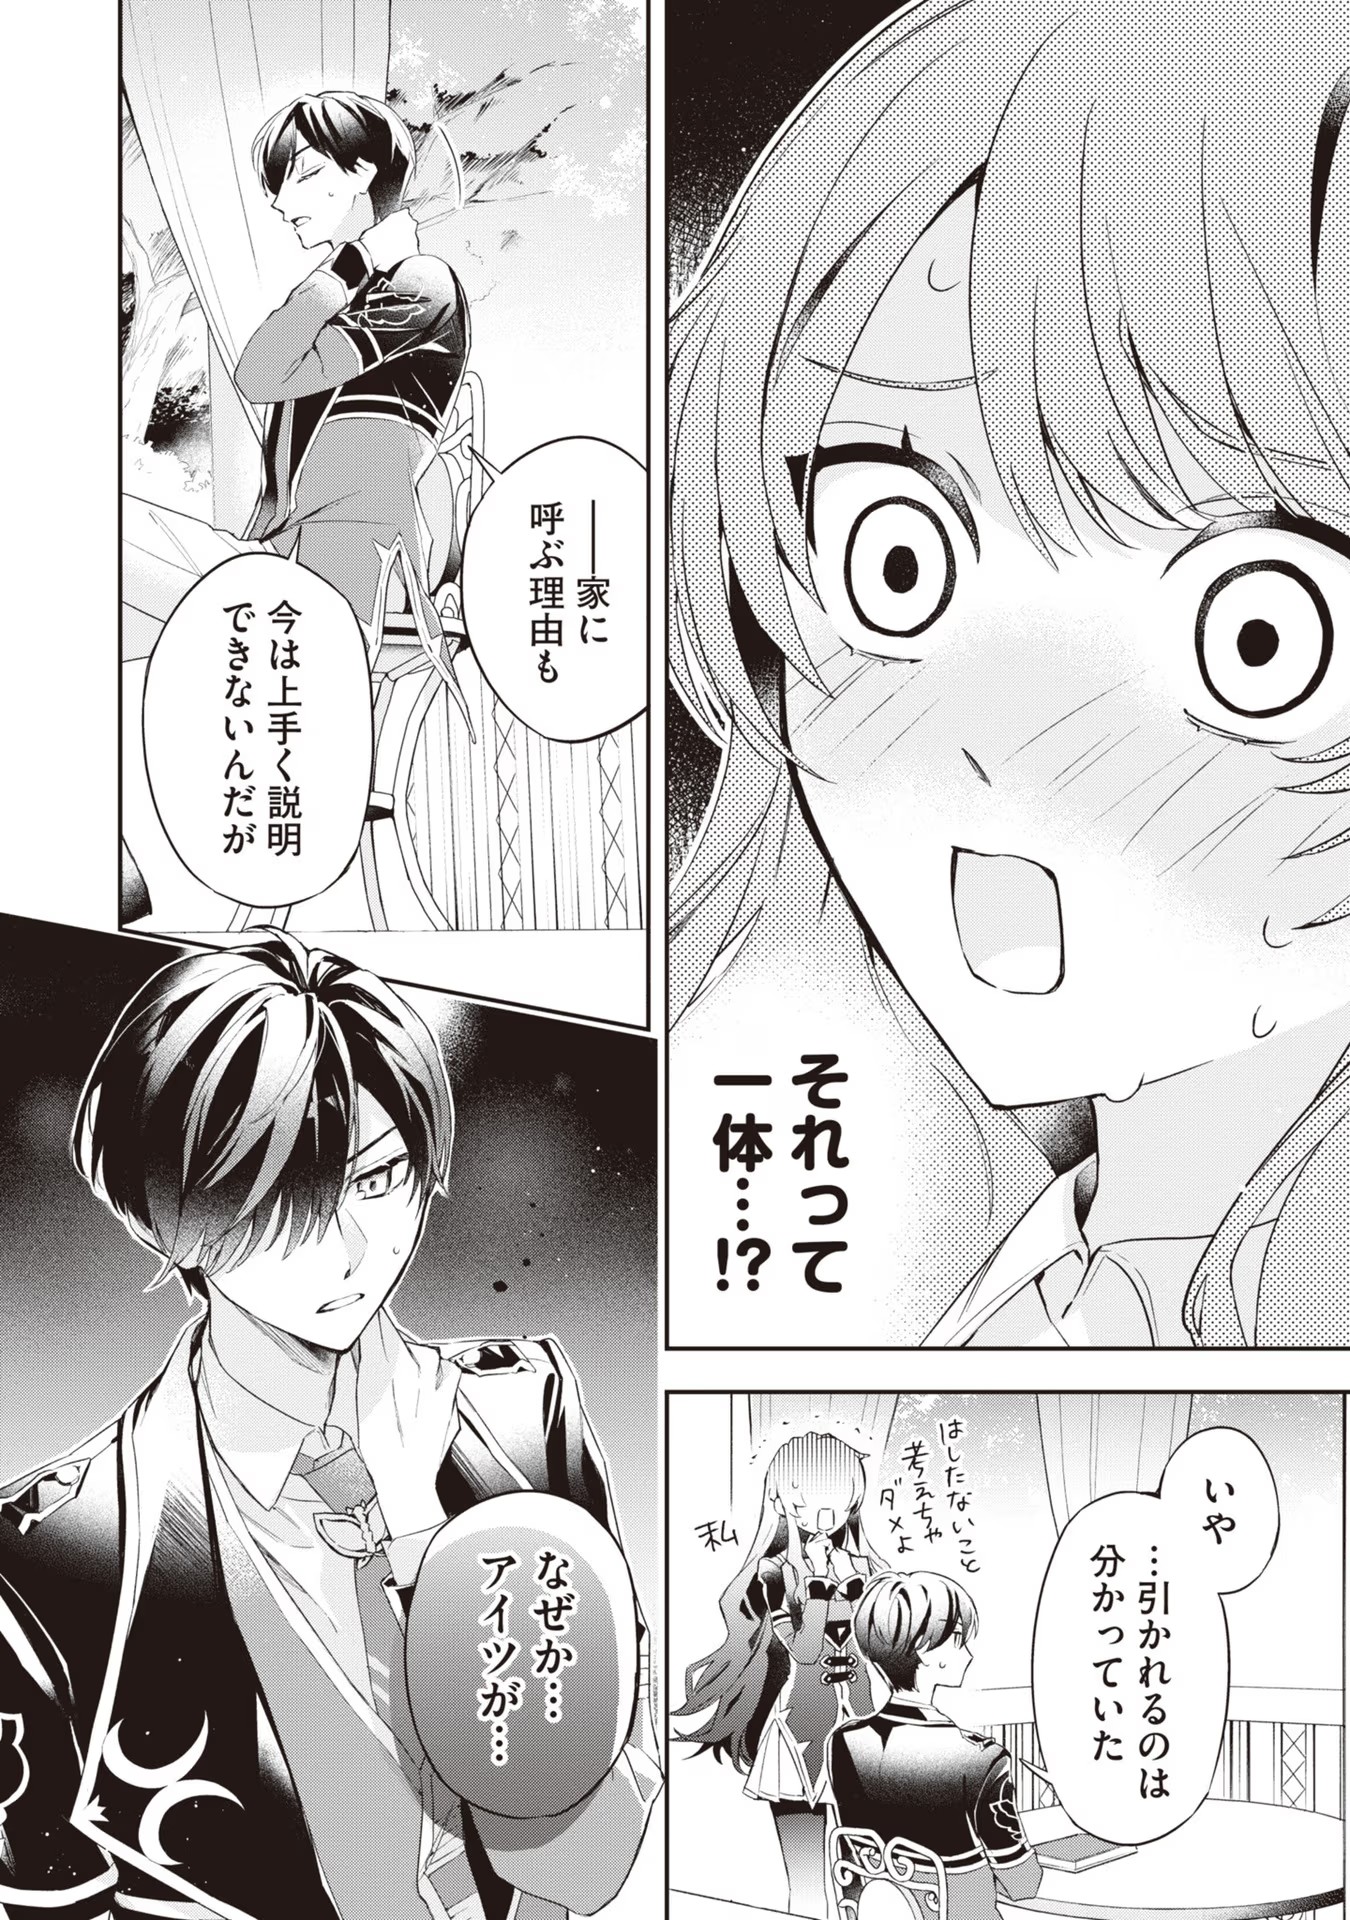 Kyou mo Reisoku to Kisoiatte Iru you desu If the Villainess and the Villain Were to Meet and Fall in Love ~It Seems the Shunned Heroine Who Formed a Contract With an Unnamed Spirit Is Fighting With the Nobleman Yet Again~ If the Villainess and Villain Met 第14話 - Page 26